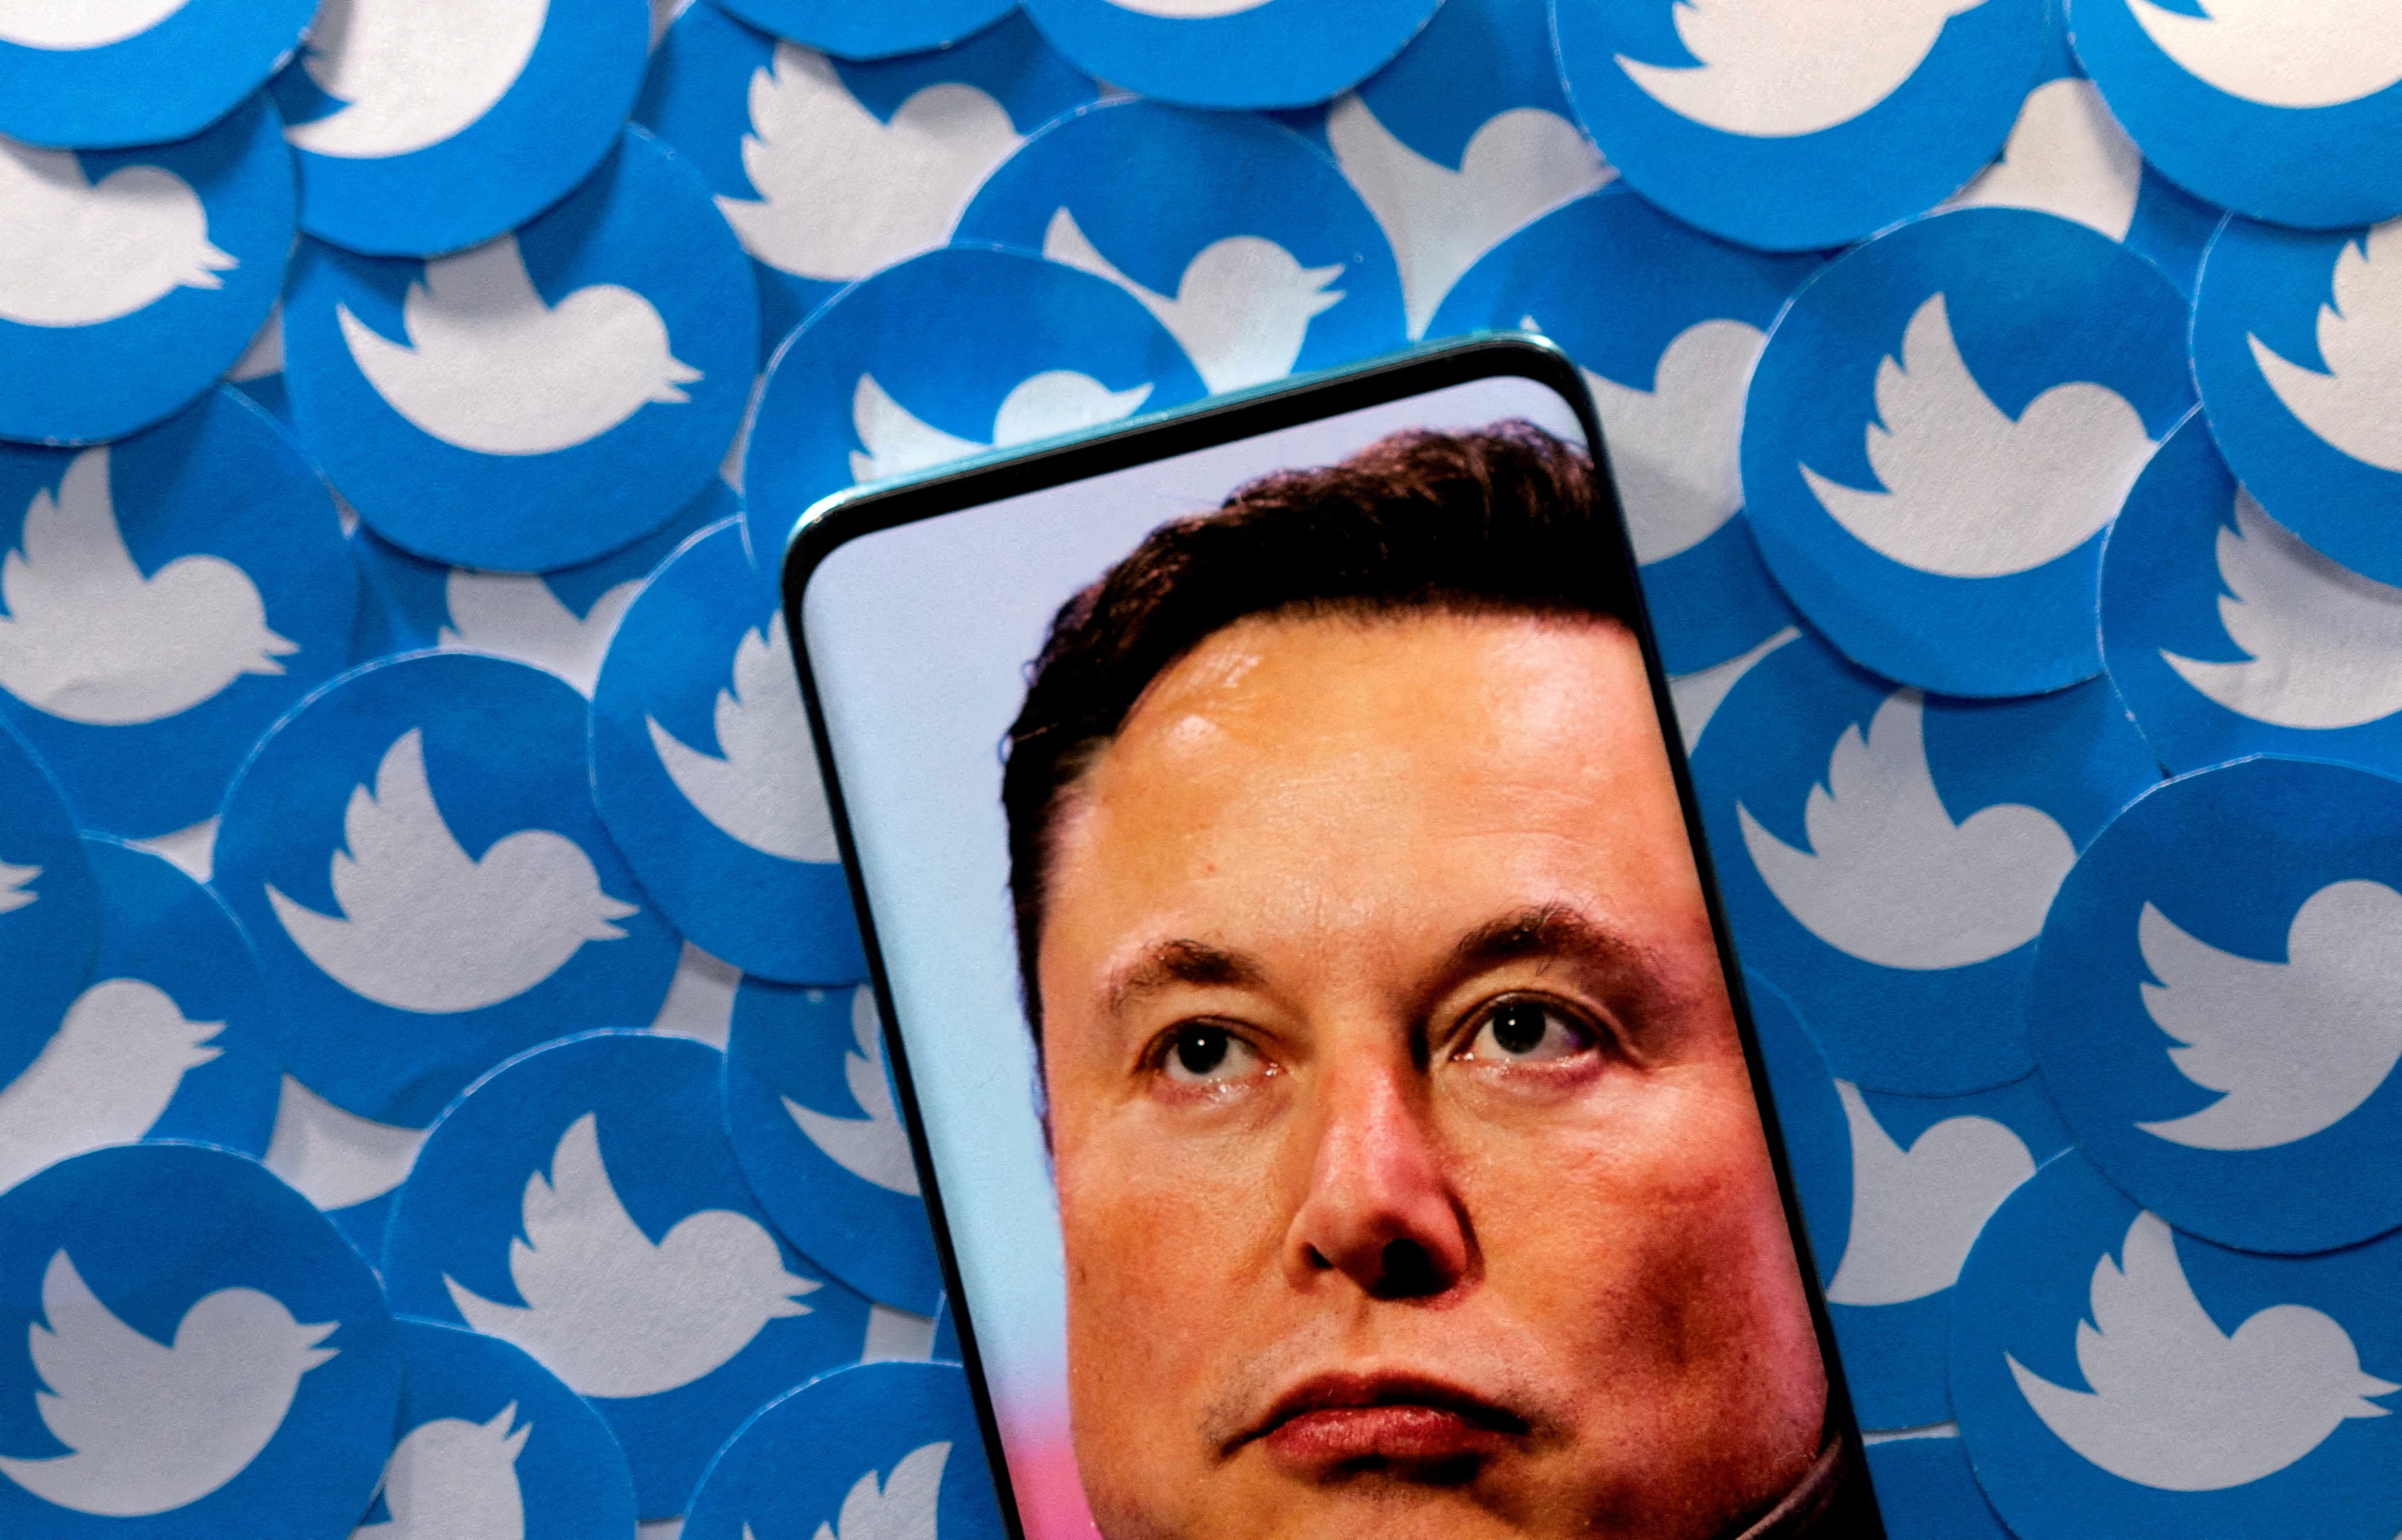 Elon Musk was trolled on his platform Twitter for his tweet suggesting Sam Bankman-Fried will never be investigated